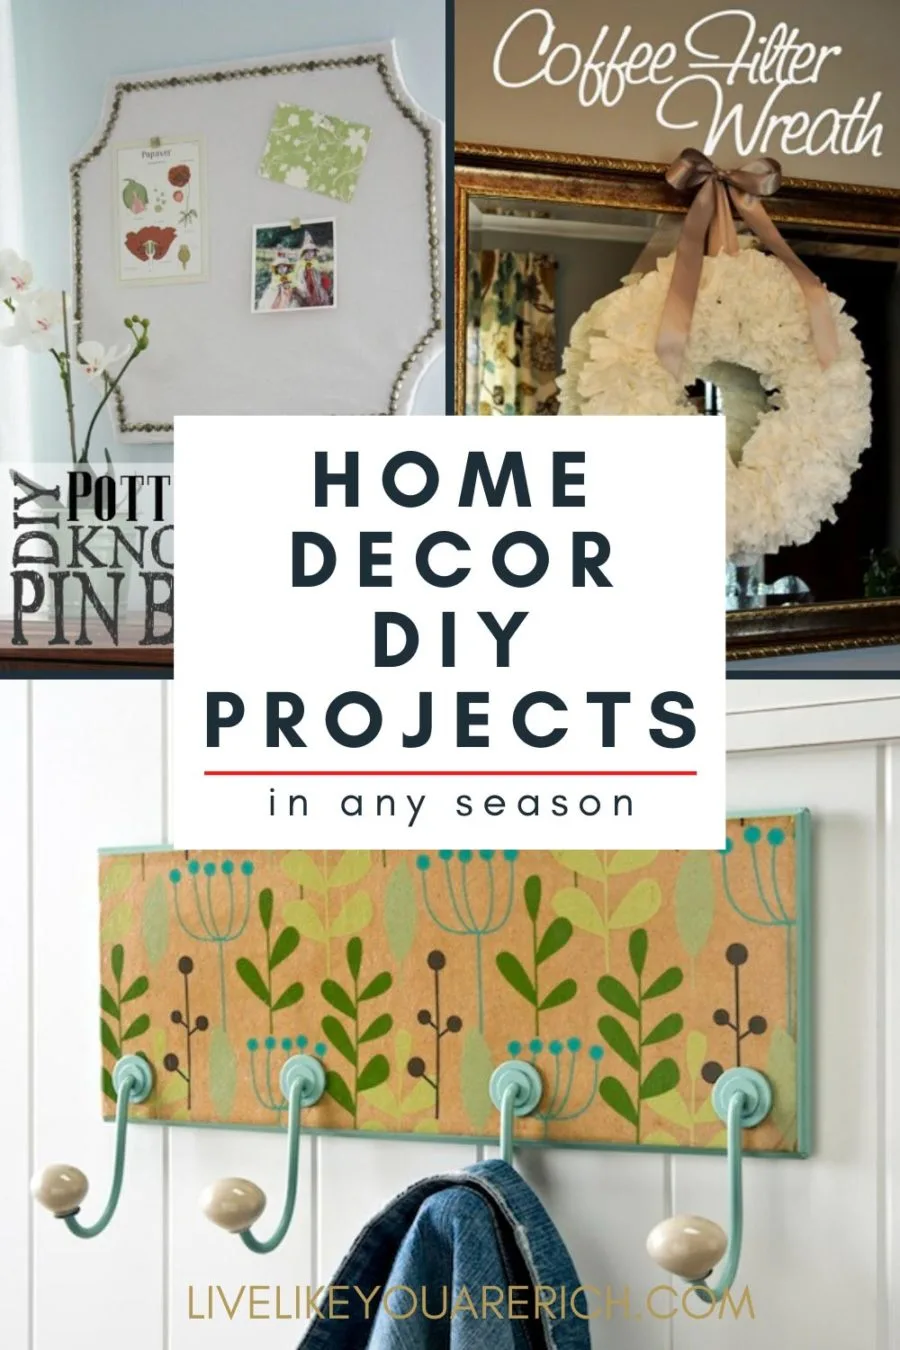 You don’t have to spend a fortune decorating your home beautifully. Here is a proof of this! Check out these amazing ideas of how you can create quality home decor items inexpensively. #homedecor #diy #decorating